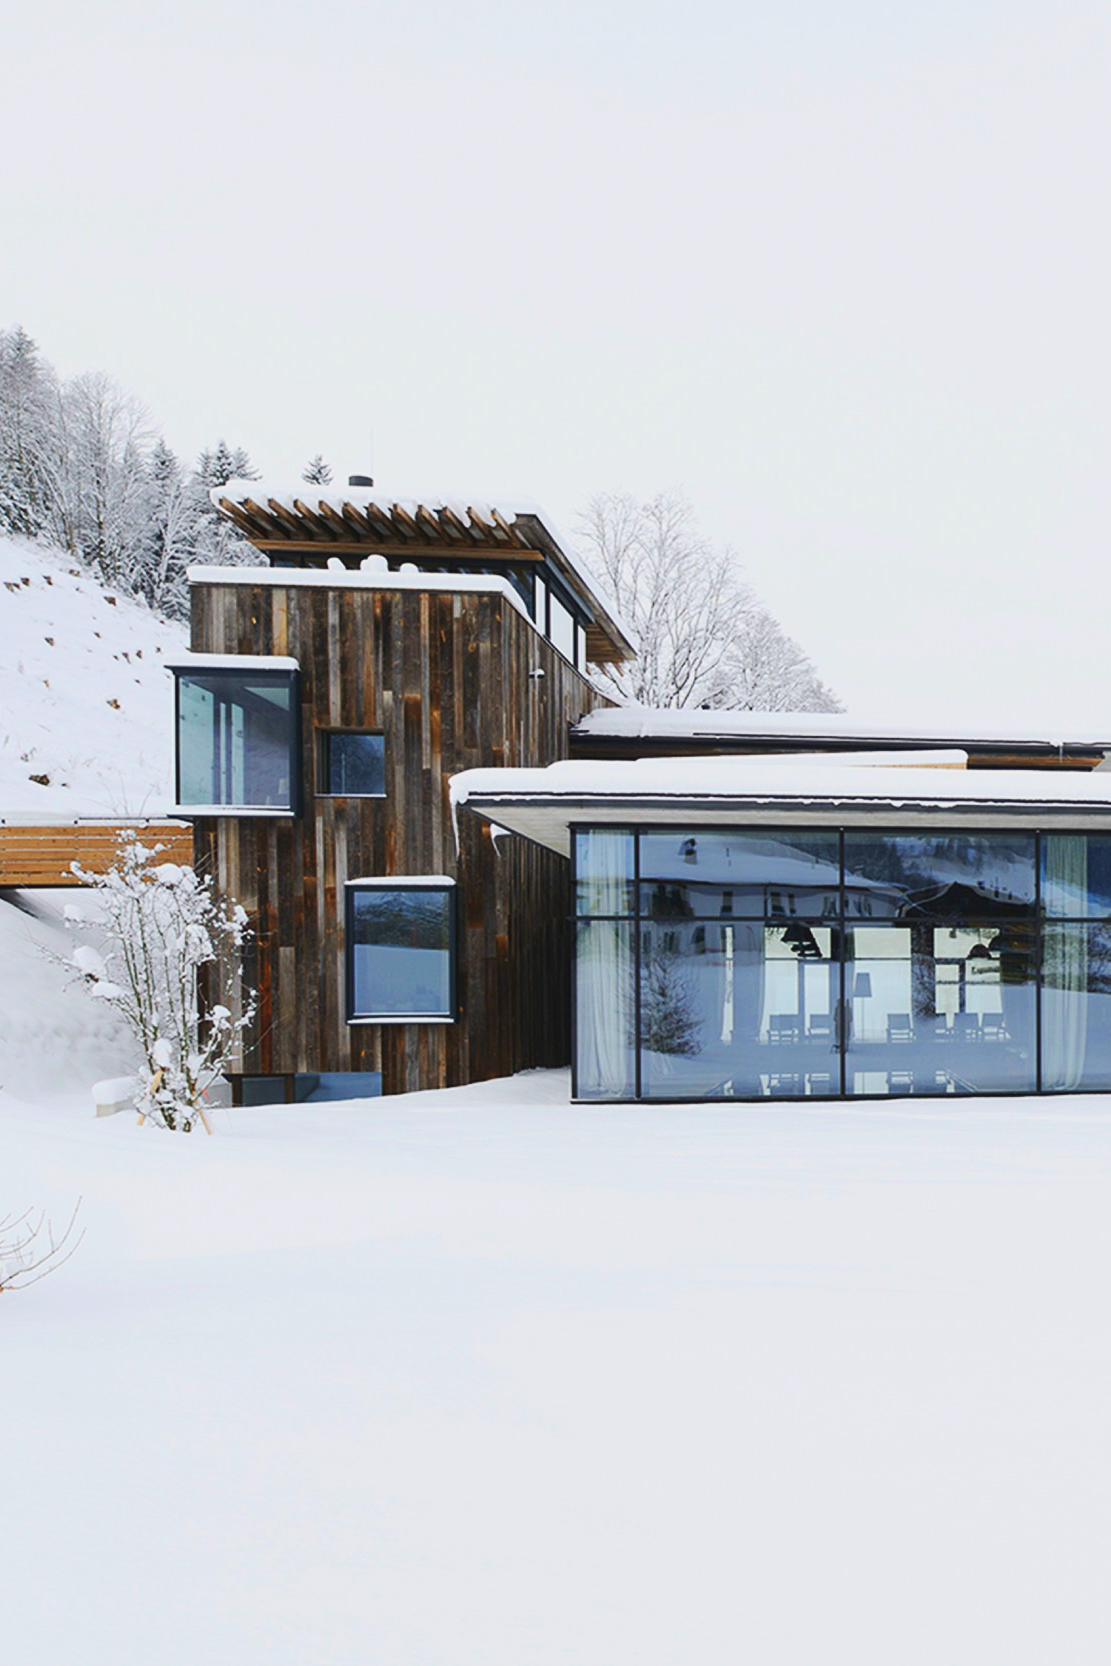 Wood and glass architecture in snow ITCHBAN.com